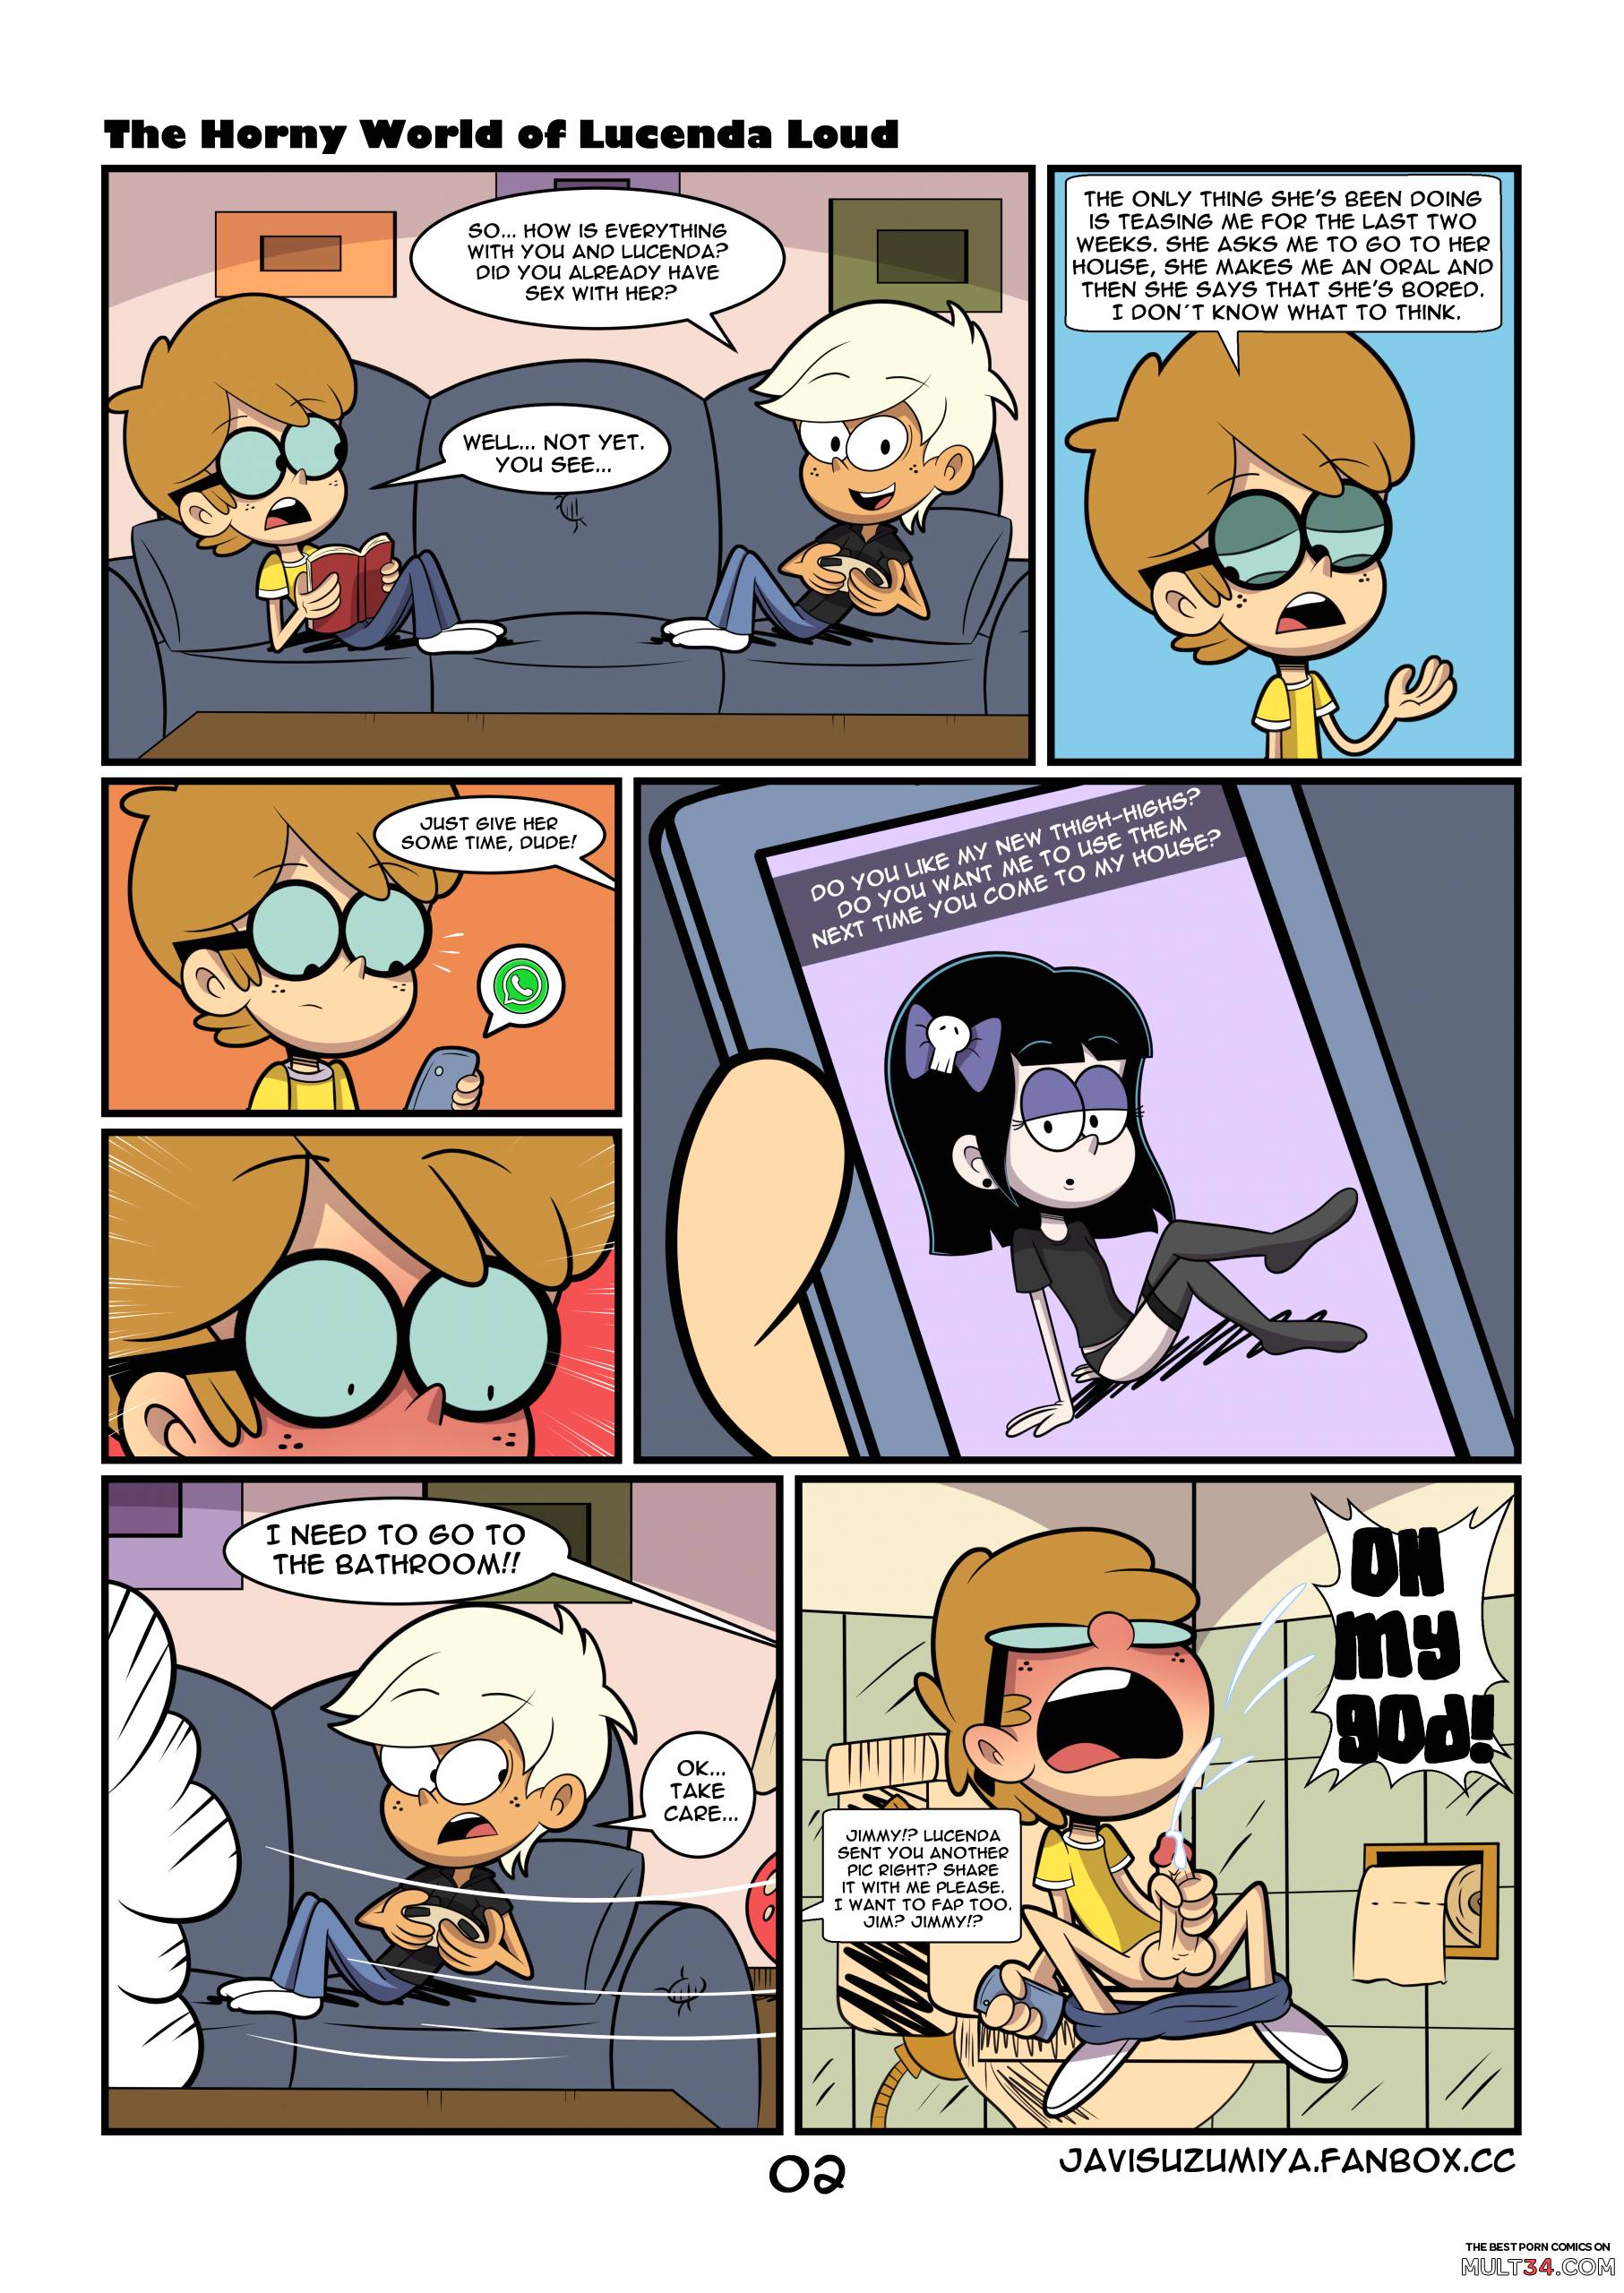 The Horny World of Lucenda Loud page 2